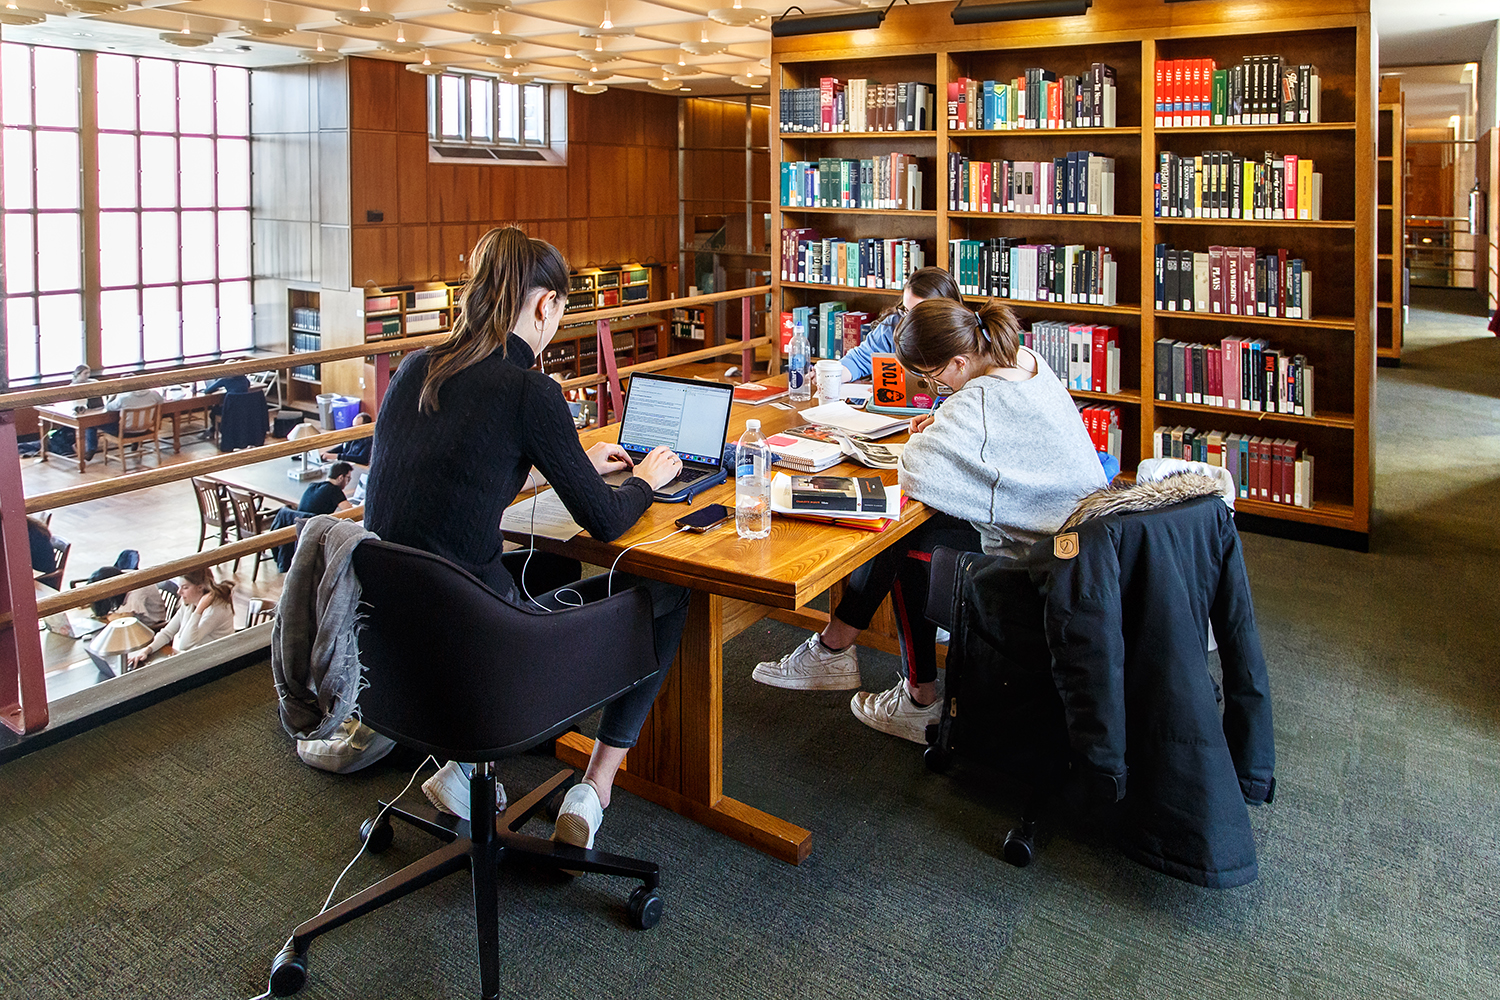 Students studying in Firestone Library's Trustee Reading Room. Photo credit Shelley Szwast.